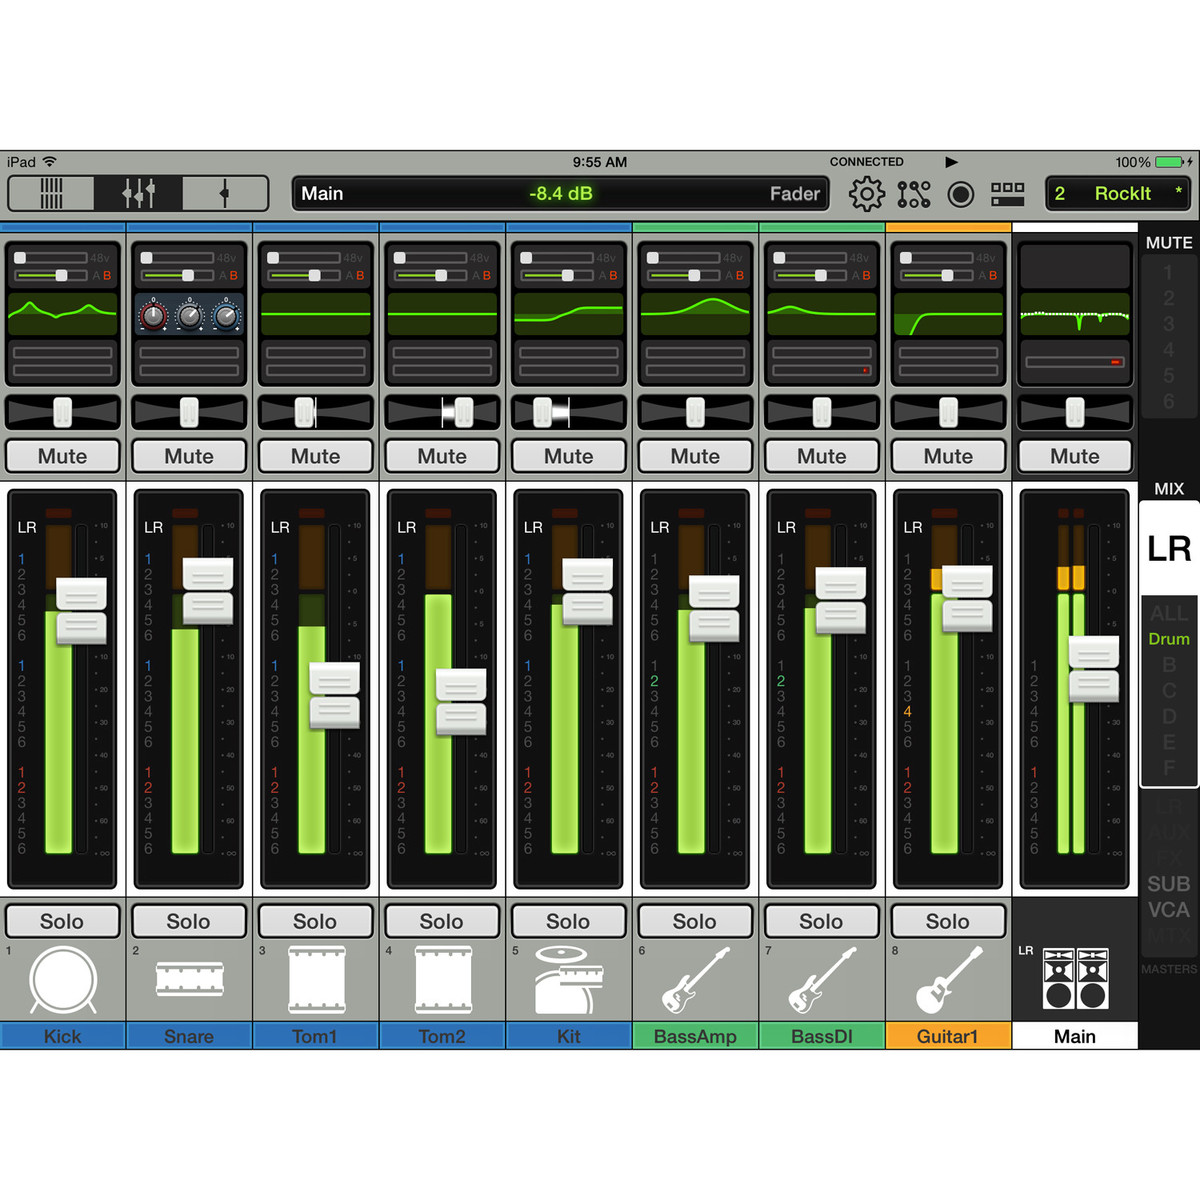 Mackie Dl32r Pour Ipad - Opnemer in rack - Variation 8